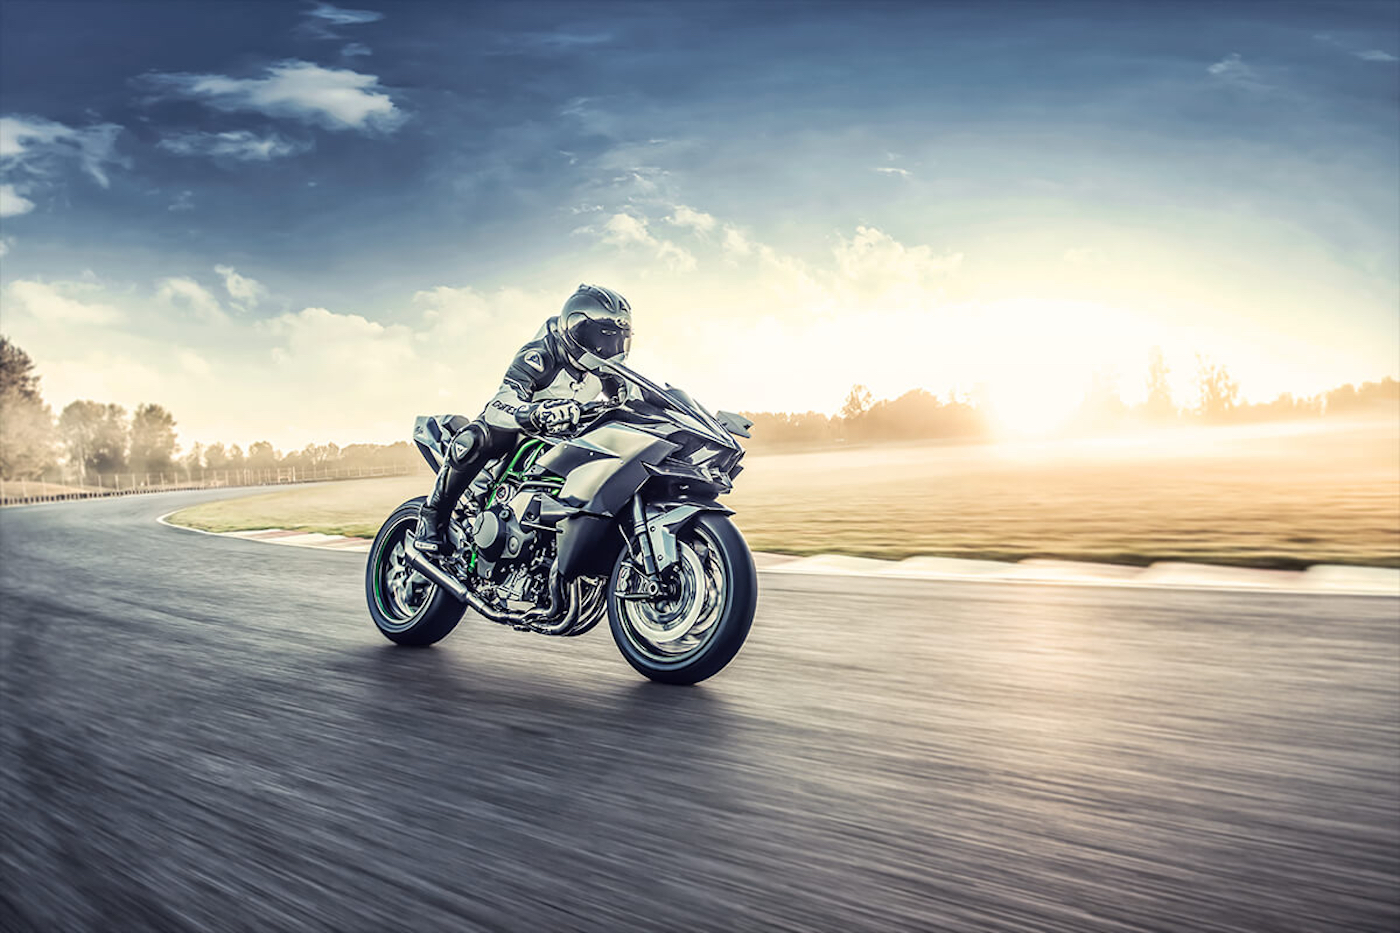 This is what the fastest motorcycle in the world looks like now The